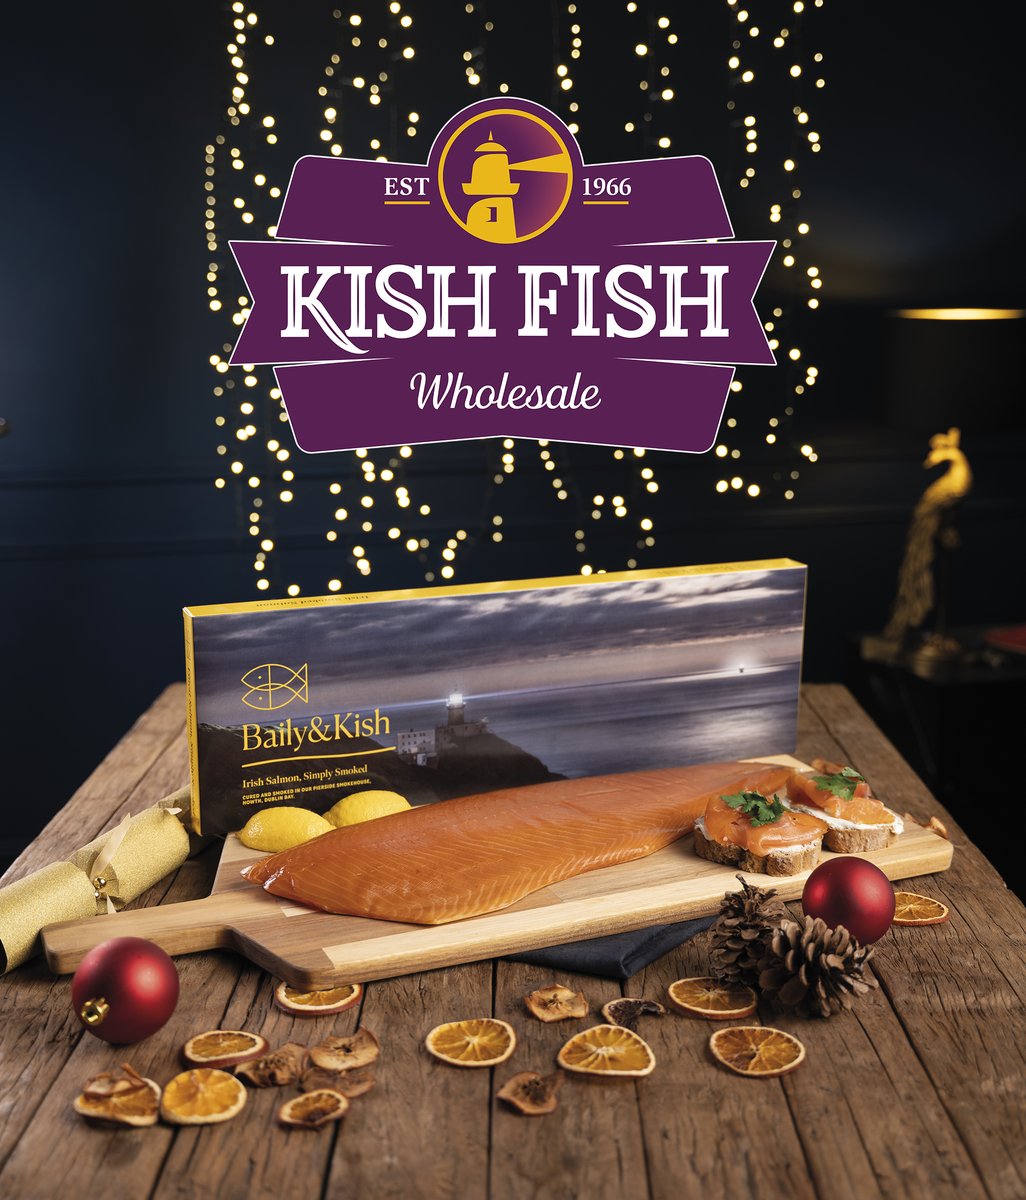 🇮🇪🌊💚❤️🐠🍽️ We are now taking orders for our award-winning Baily&Kish corporate smoked salmon! Handmade in our Howth smokehouse, our smoked salmon is the best in town! Contact sales@kishfish.ie or call 018543900 for the best prices. J🐟🌱📞🎉 #atkishfish #seafood #smokedsalmon